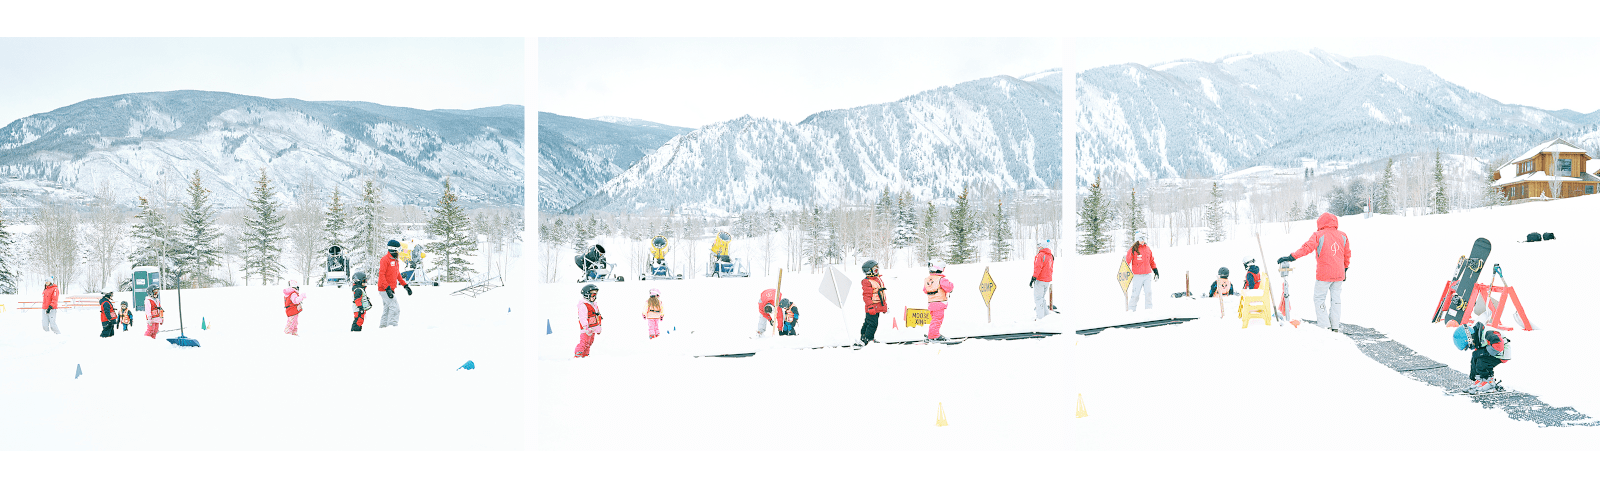 a group of children on skis in the snow